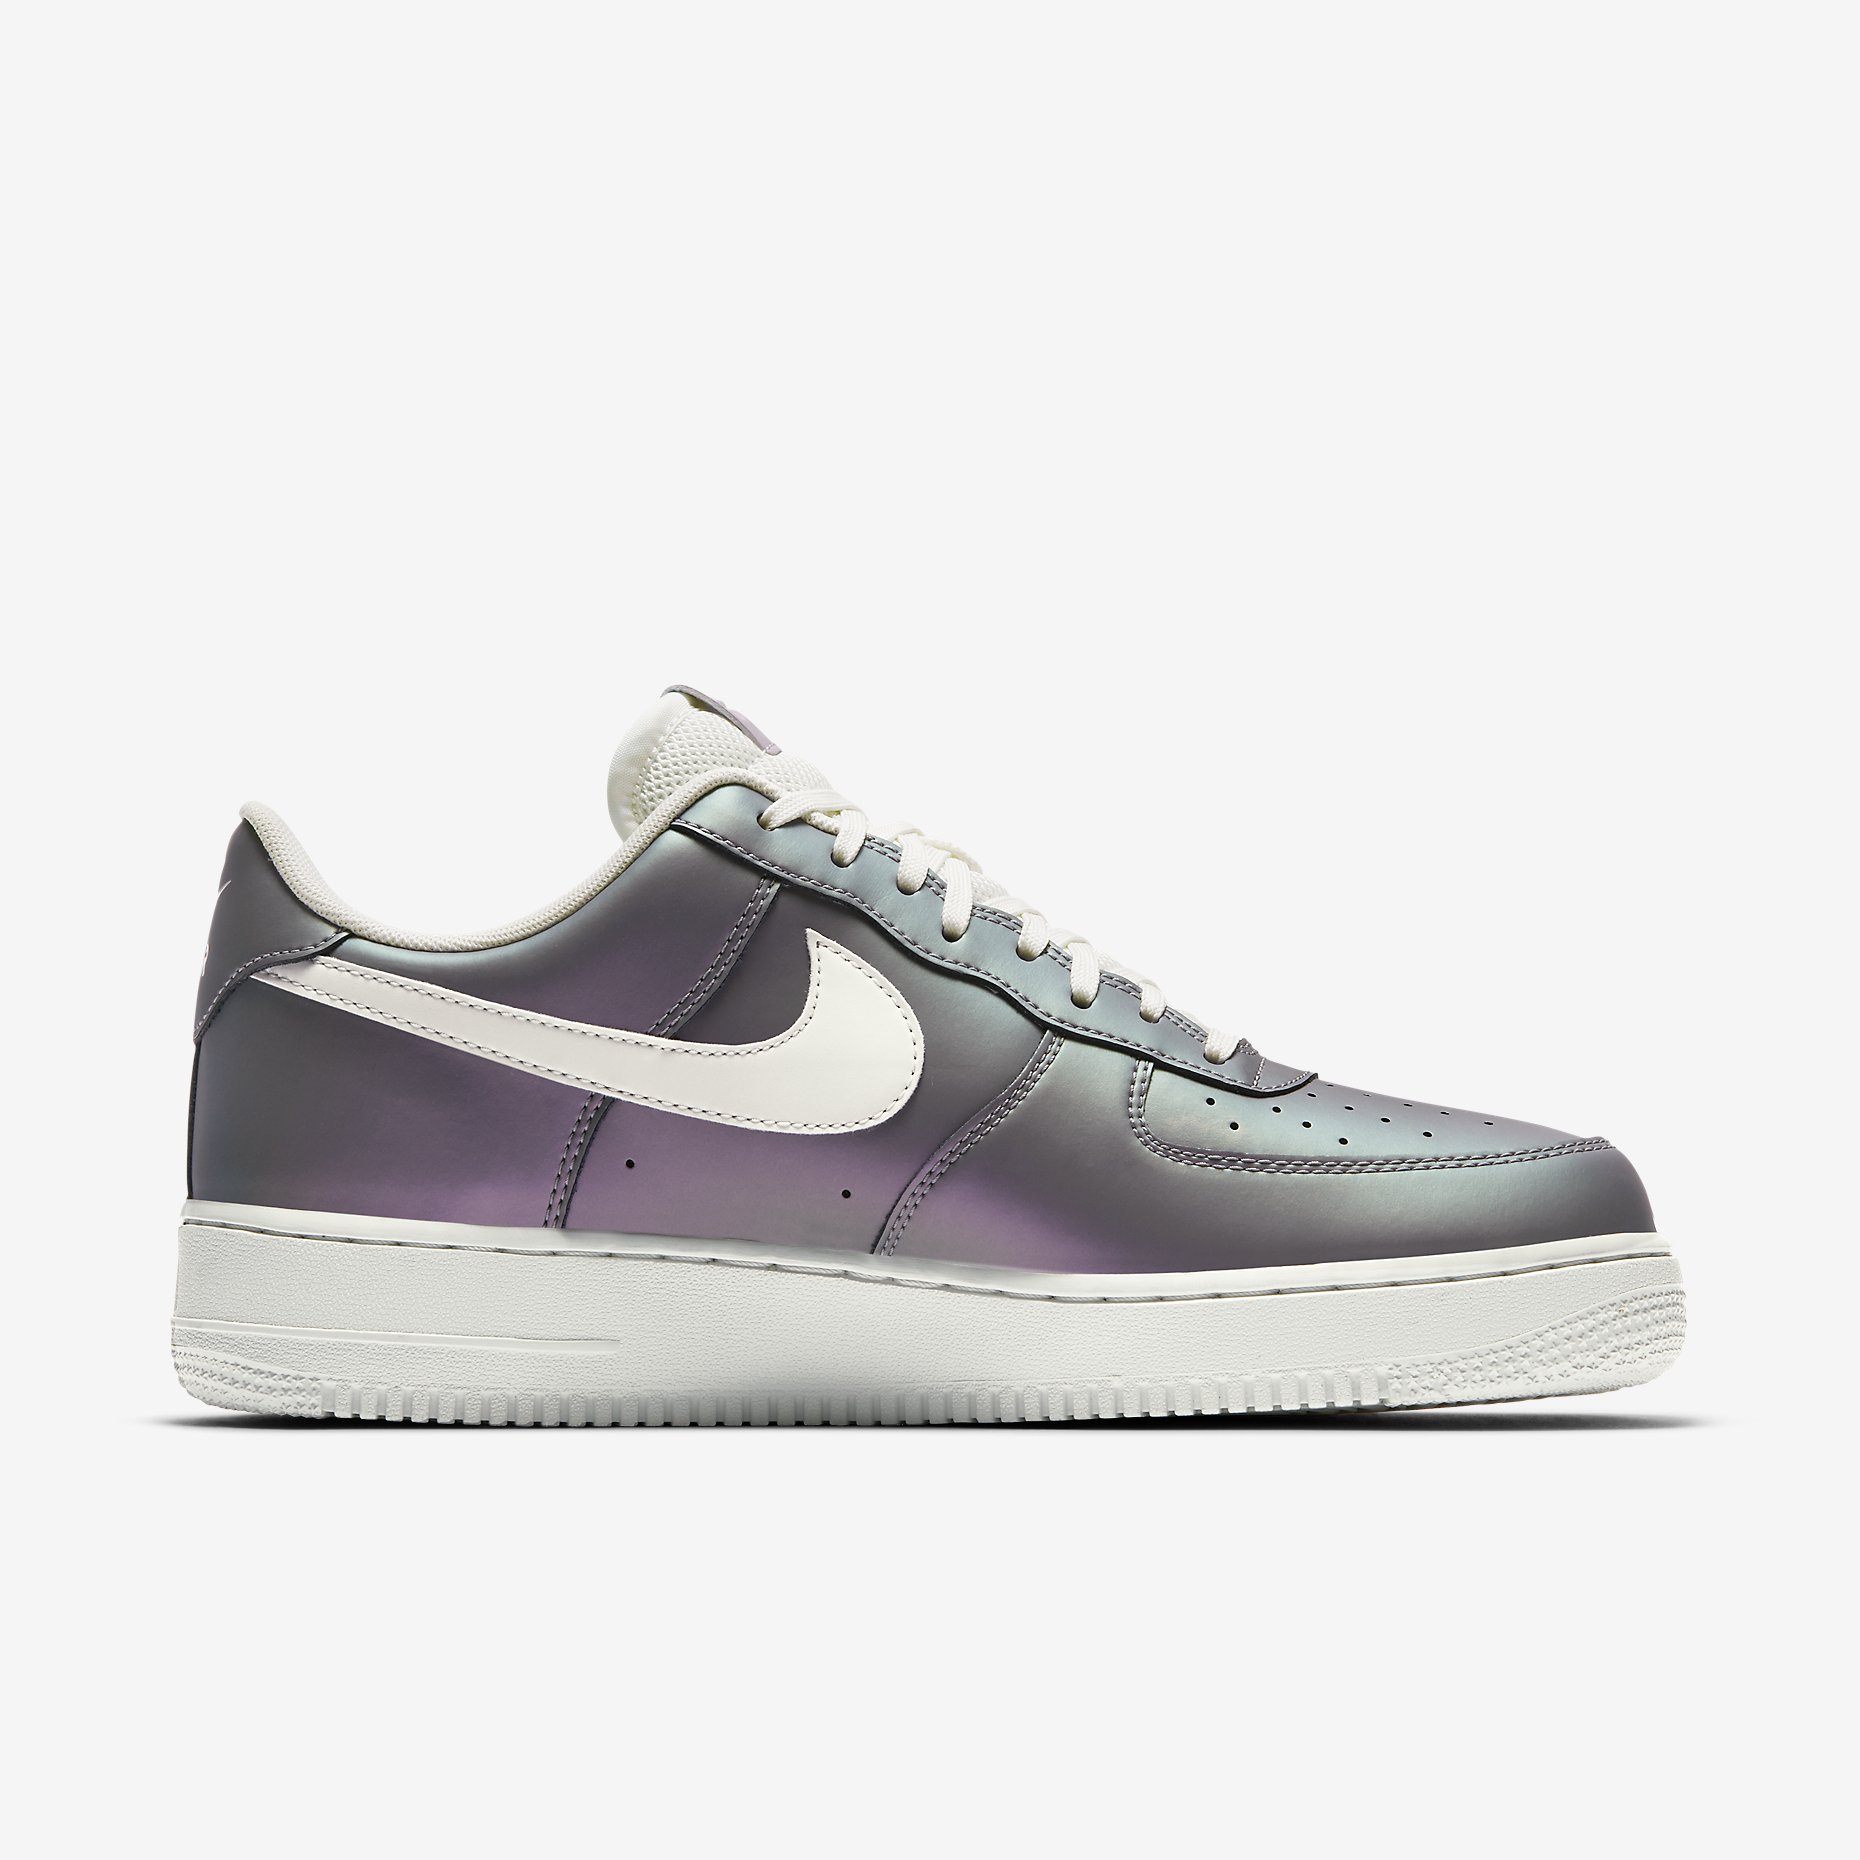 nike-air-force-1-low-07-lv8-iced-lilac-3